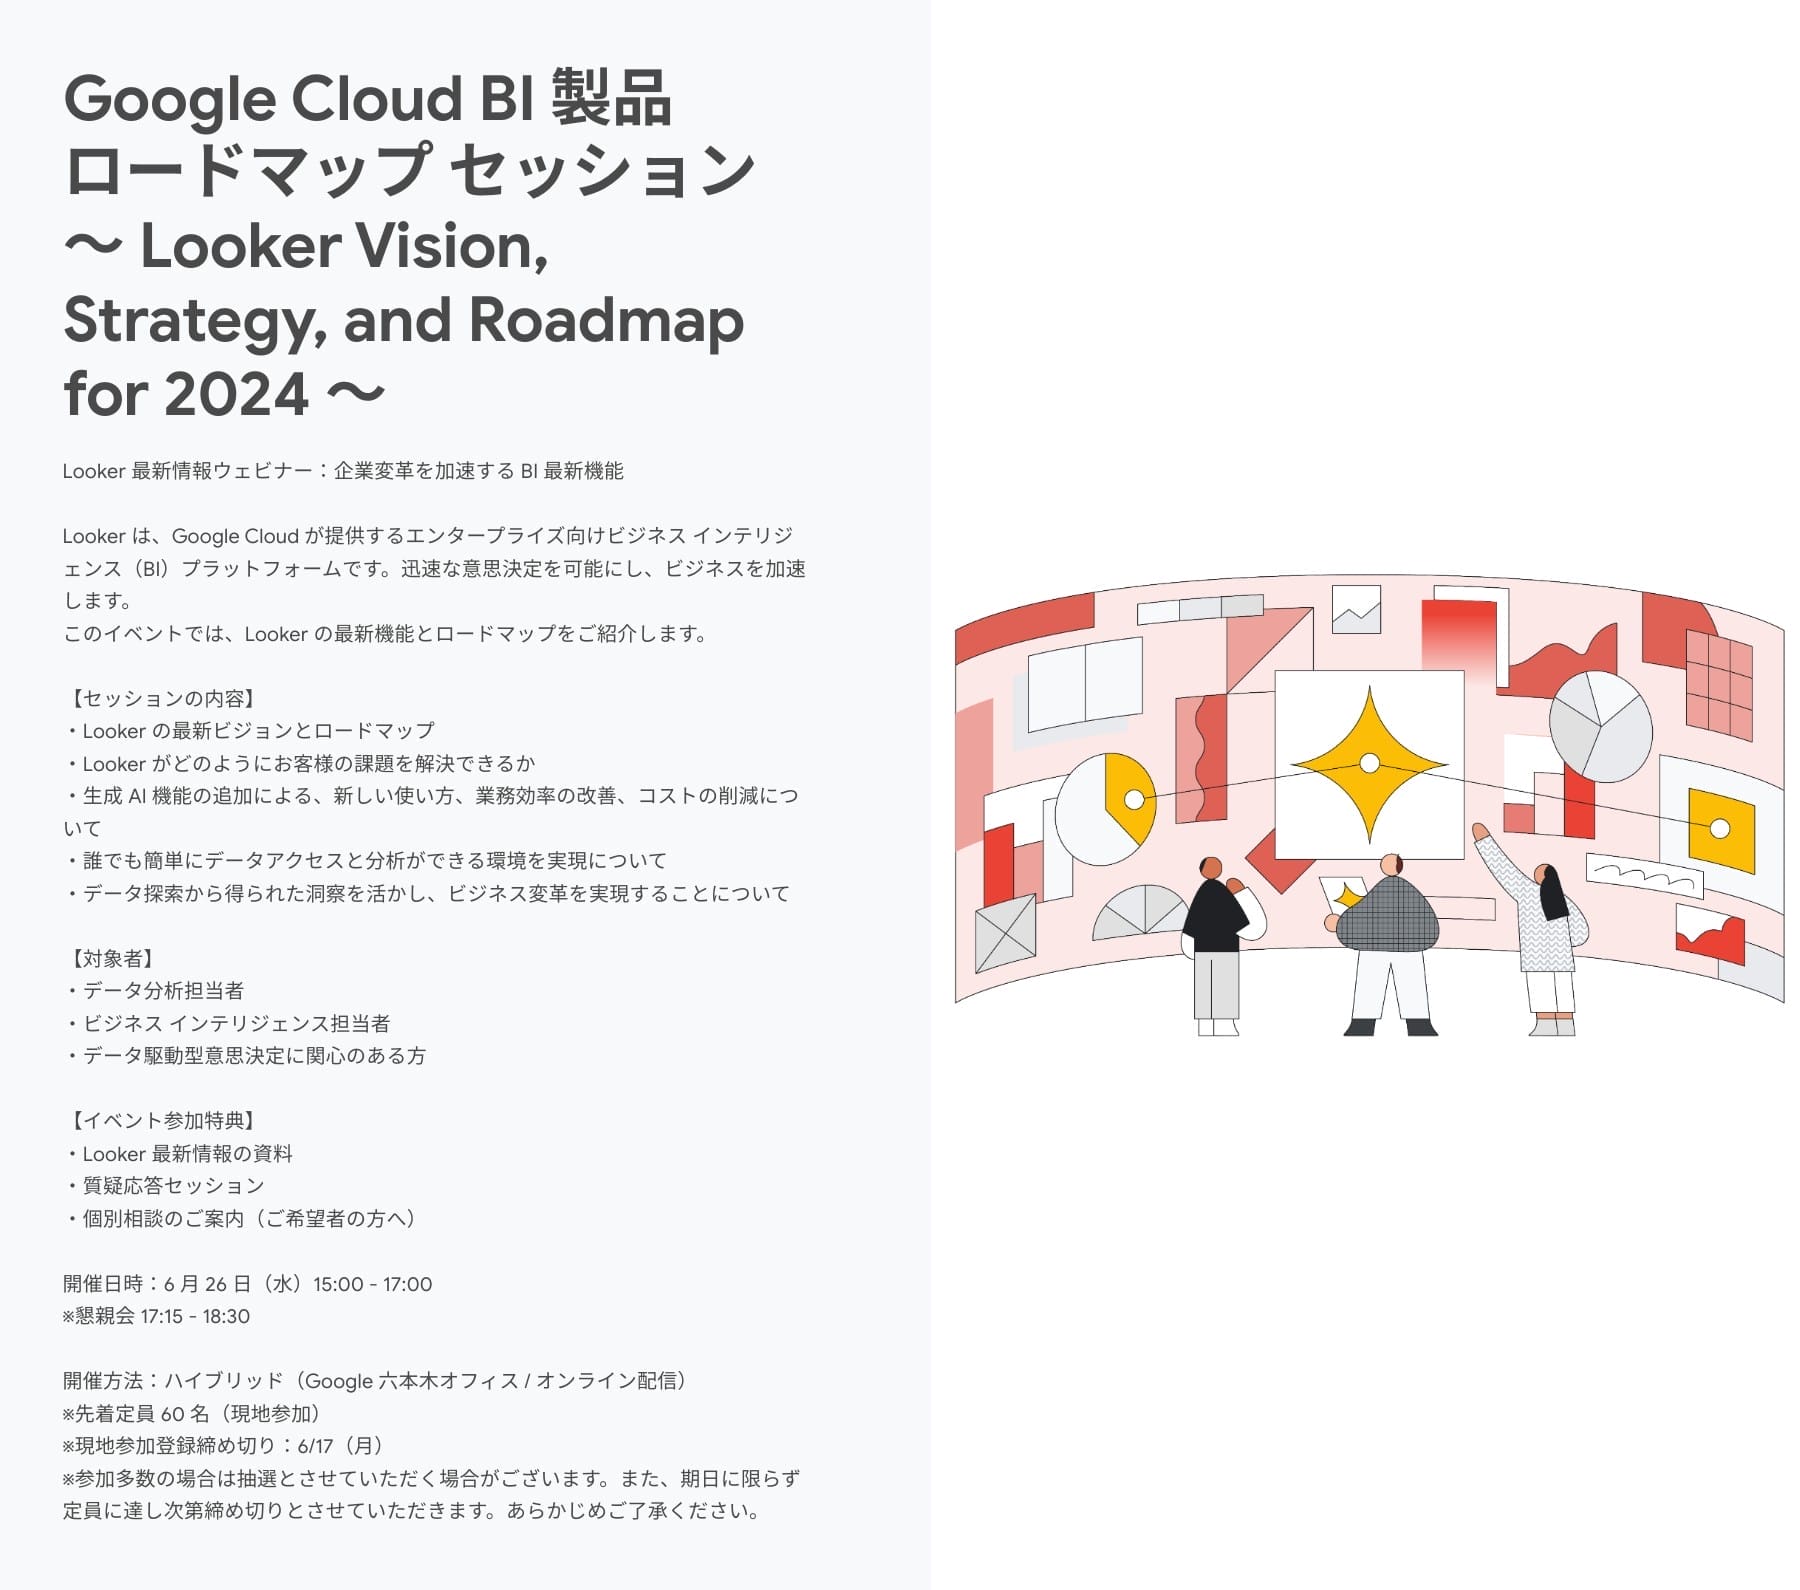 [Google Cloud] ロードマップ セッション 〜 Looker Vision, Strategy, and Roadmap for 2024 〜